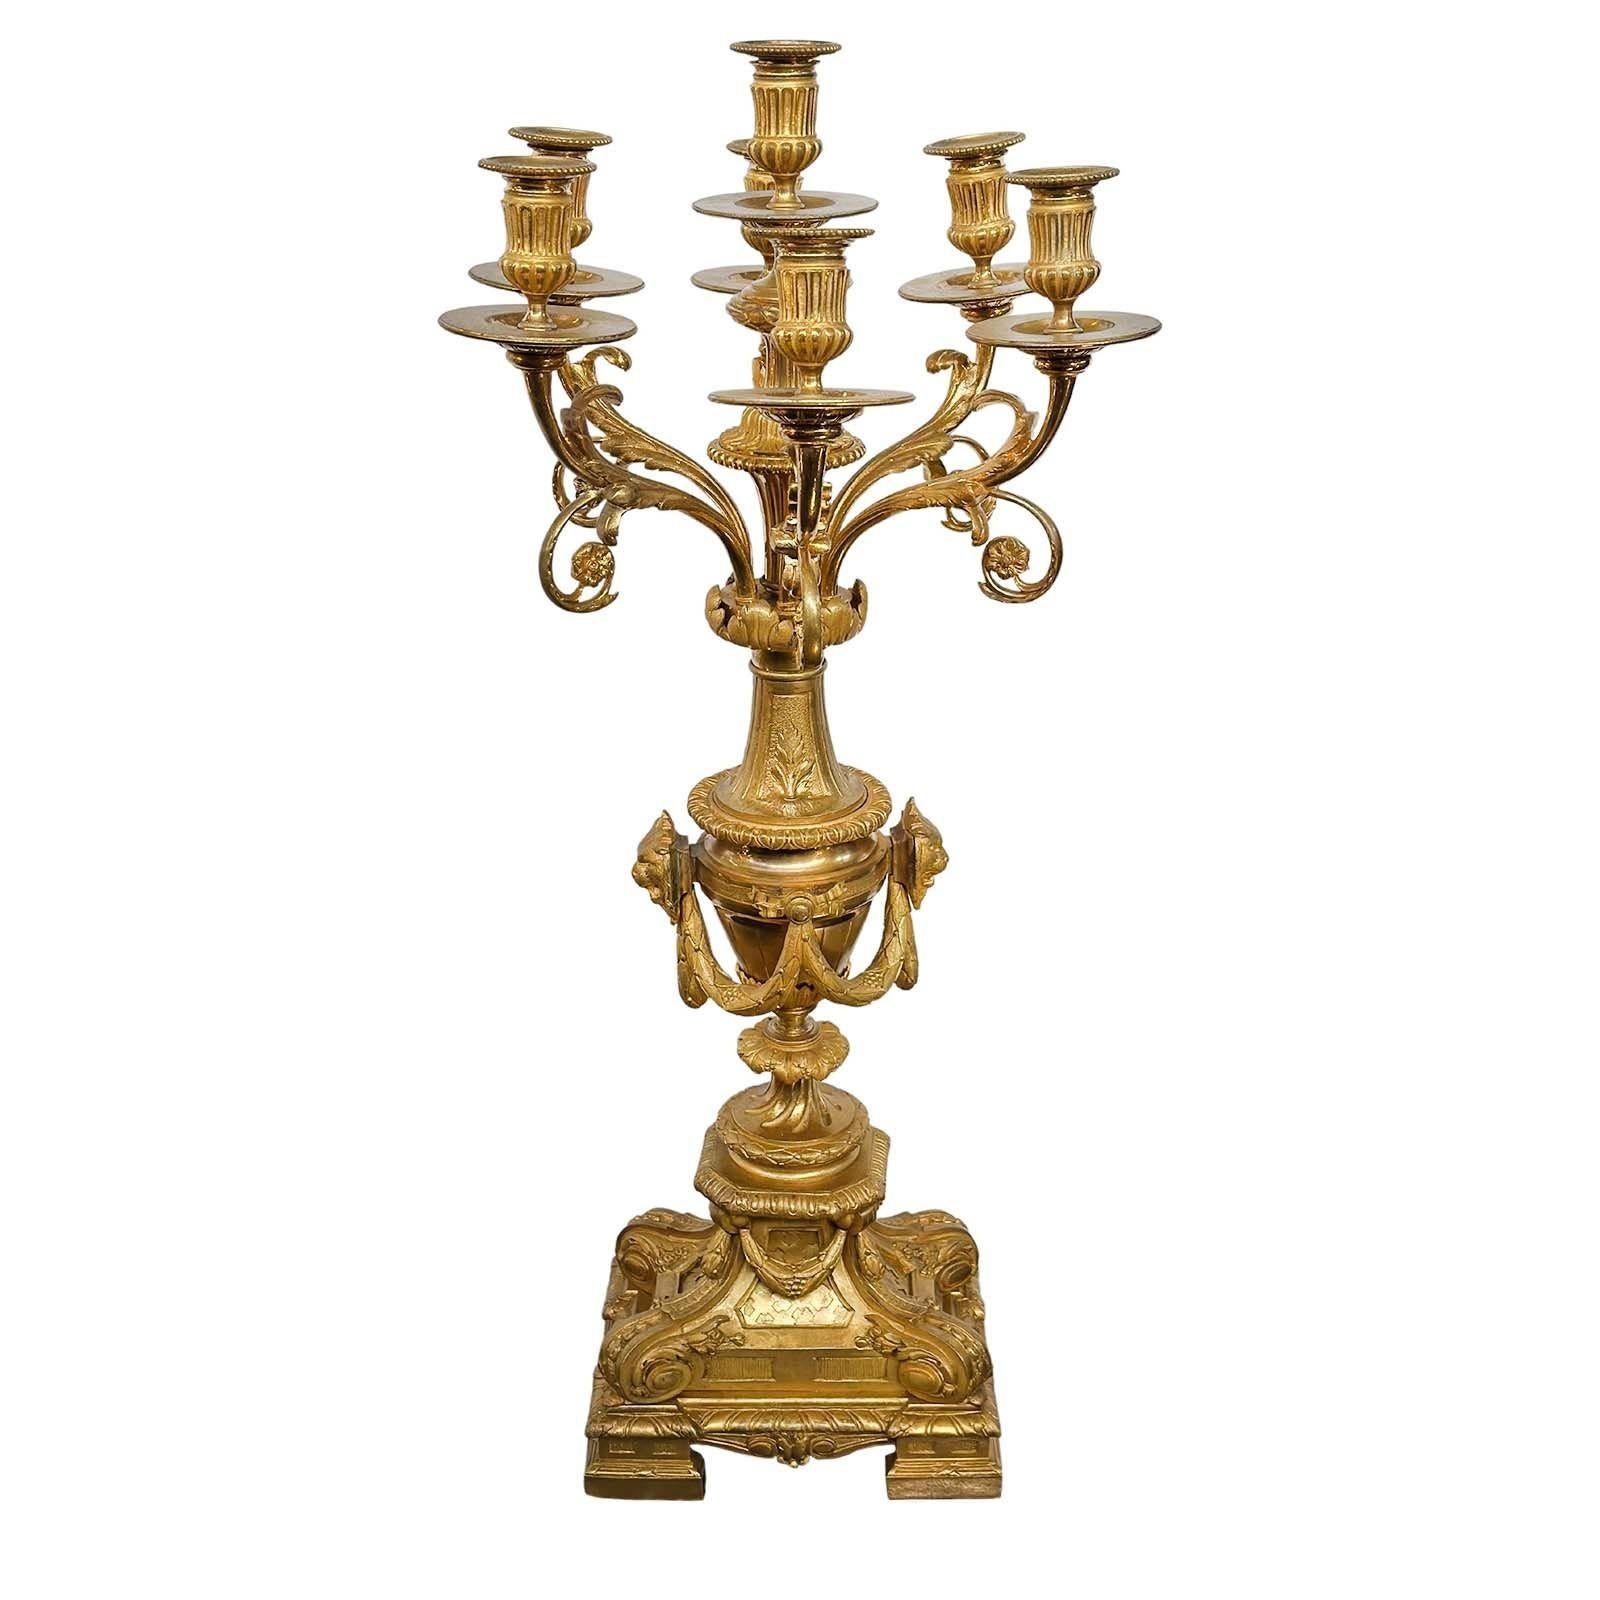 Pair of graceful gold-plated bronze D'ore candelabras. Made in France in the late 19th century. 
These candelabras boast a delightful combination of bronze and gold plating, lending a touch of timeless sophistication to any space. The intricate